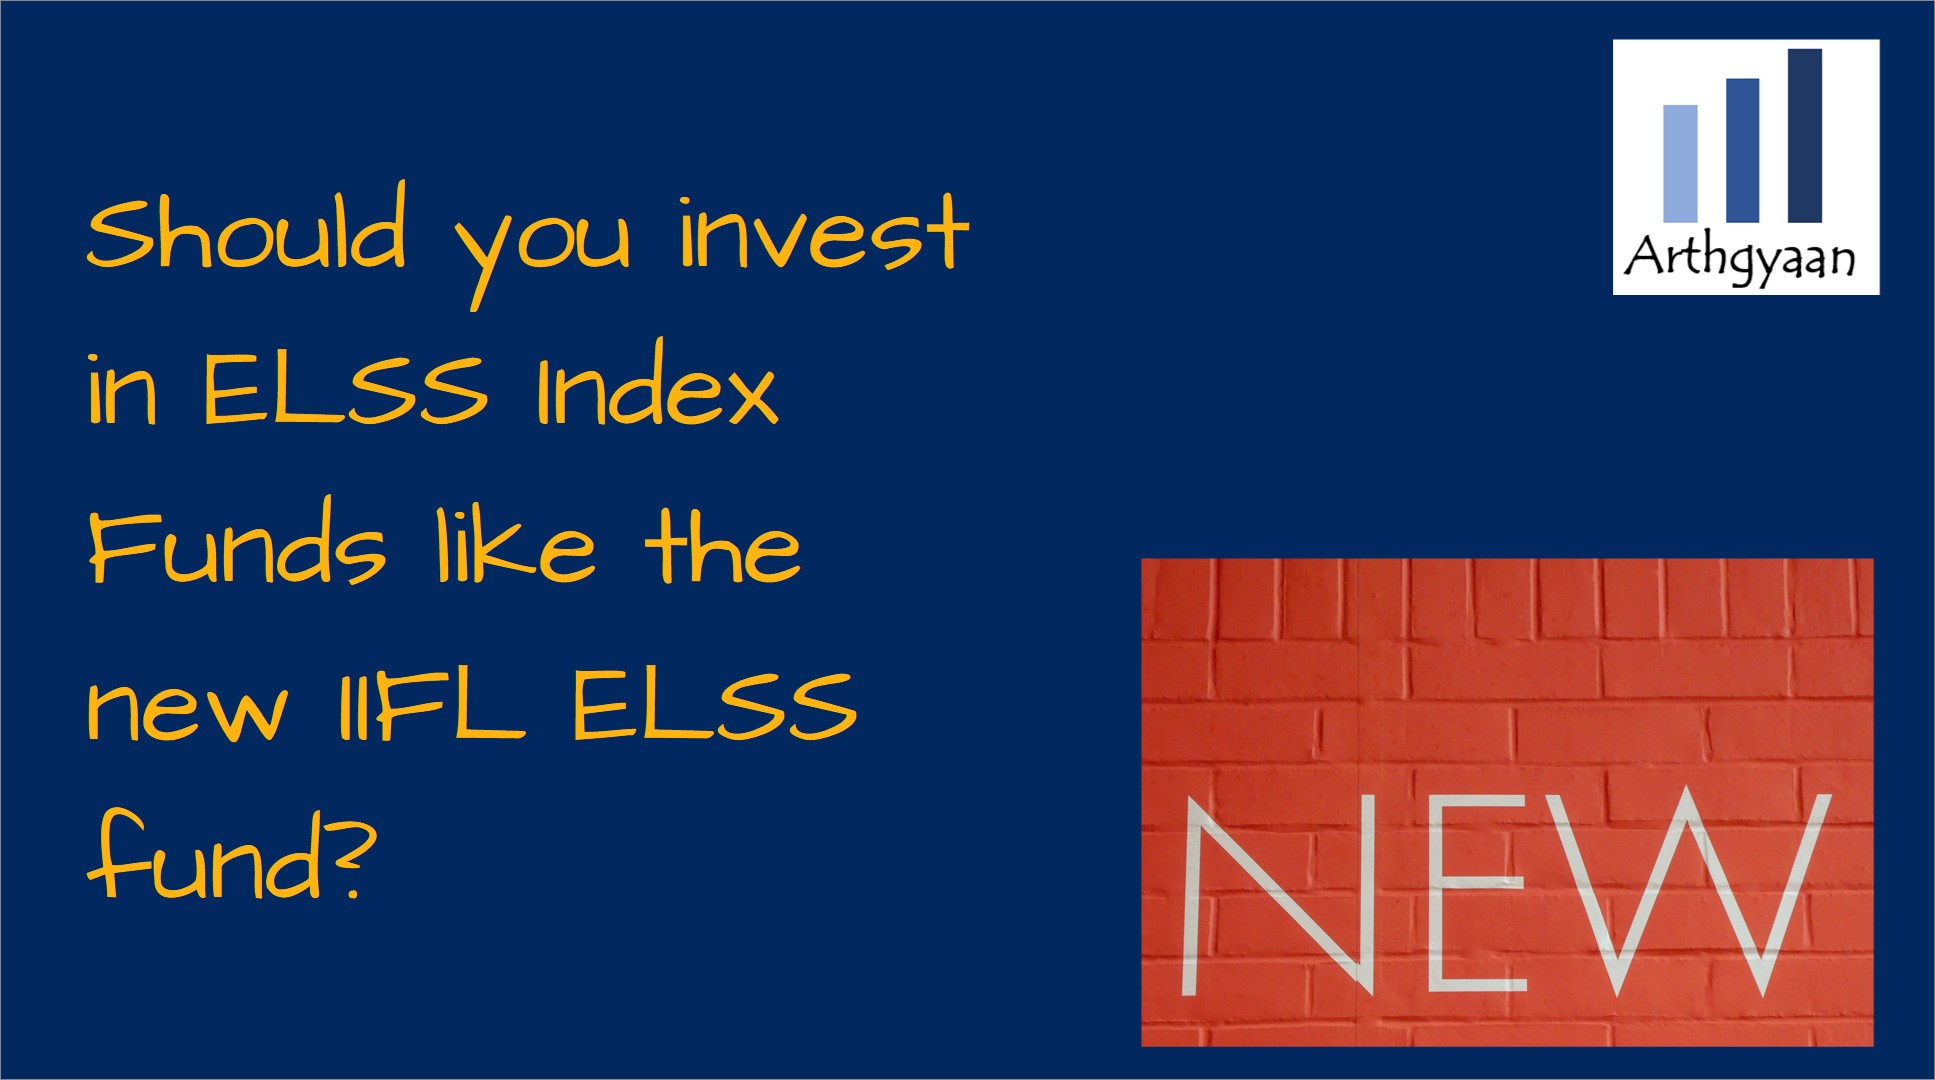 <p>This article discusses a new category of ELSS funds relaunched in India that are run as index funds. Should investors invest in ELSS index funds for tax-saving purposes?</p>

